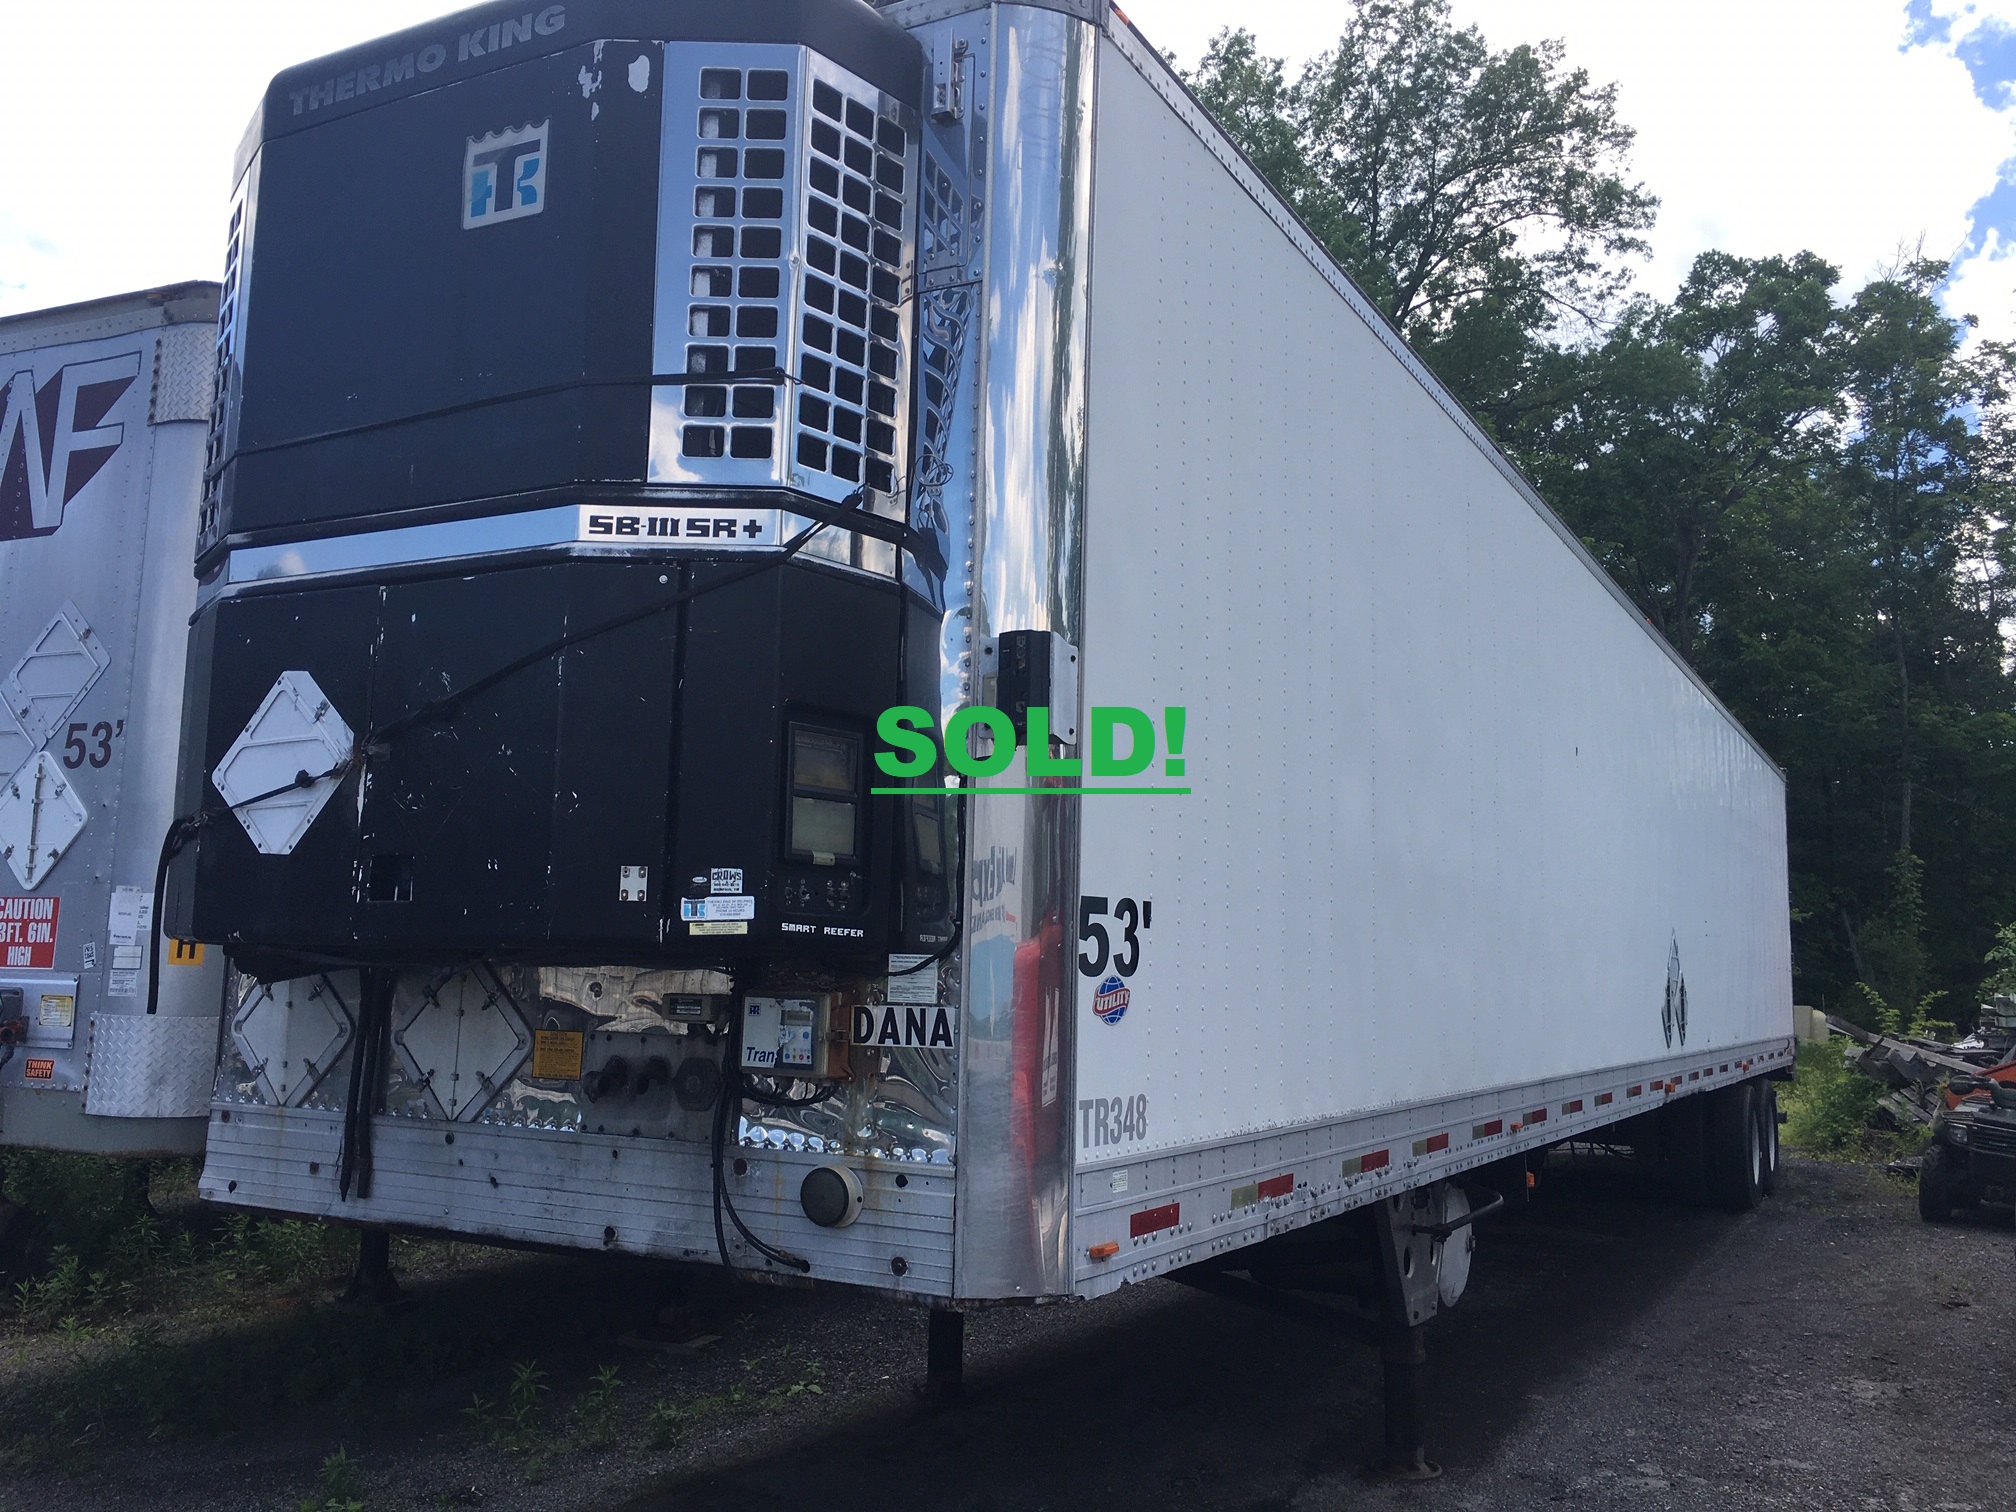 53' Refrigerated Commercial Trailer. 1998 Utility brand class A reefer trailer. It has a Thermo King (58 III SR+) refrigeration unit that runs and cools well. It has good tires and is ready for a load.